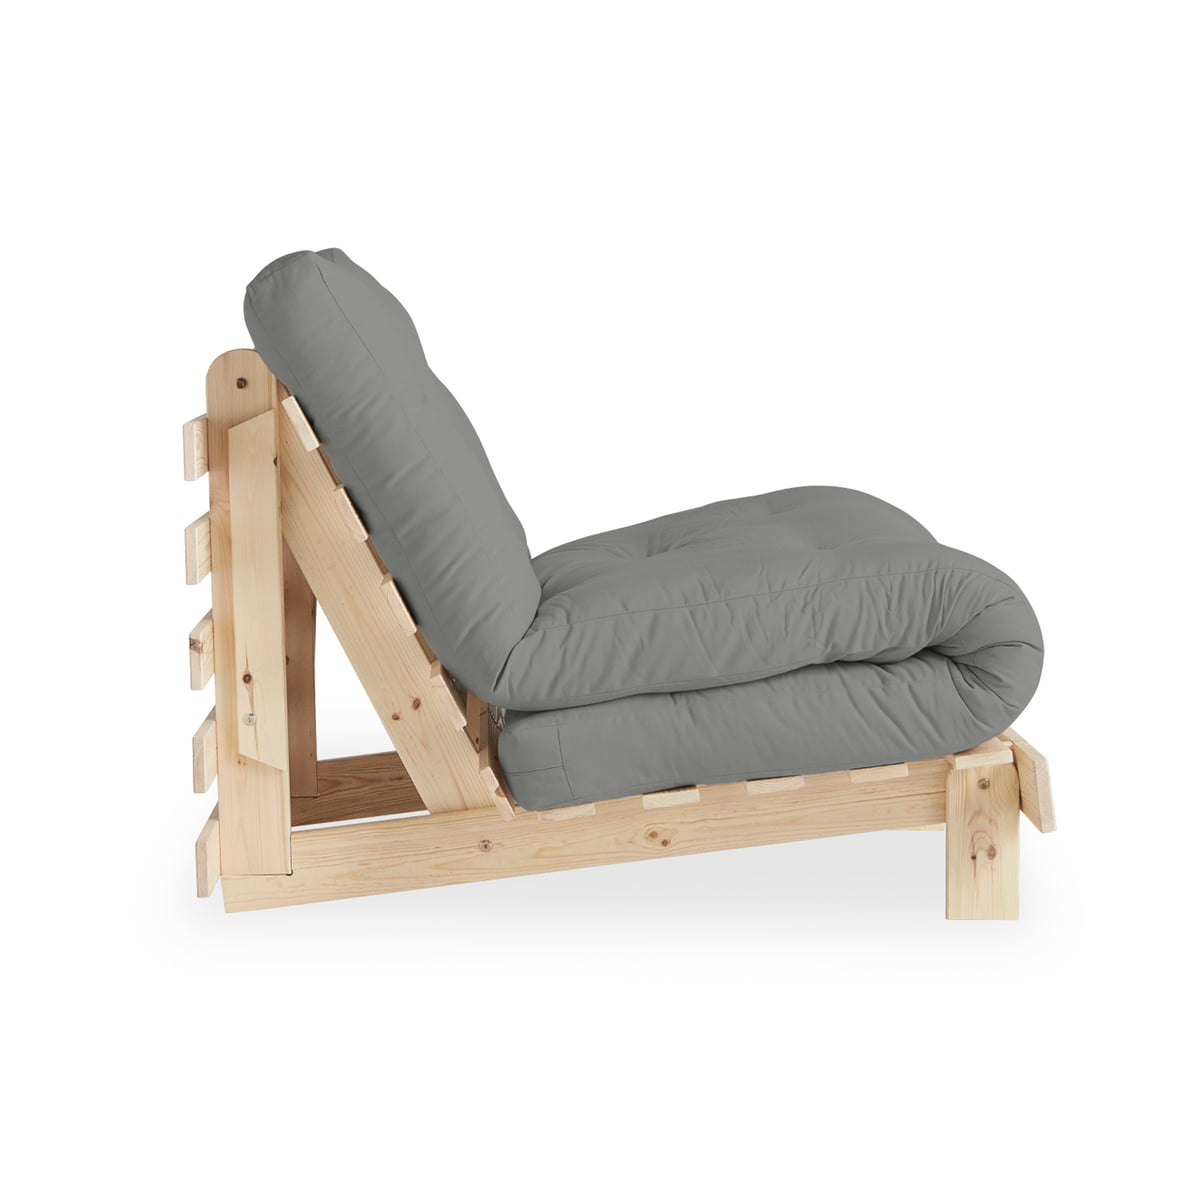 Design Roots chair Connox - Karup | Sleeping